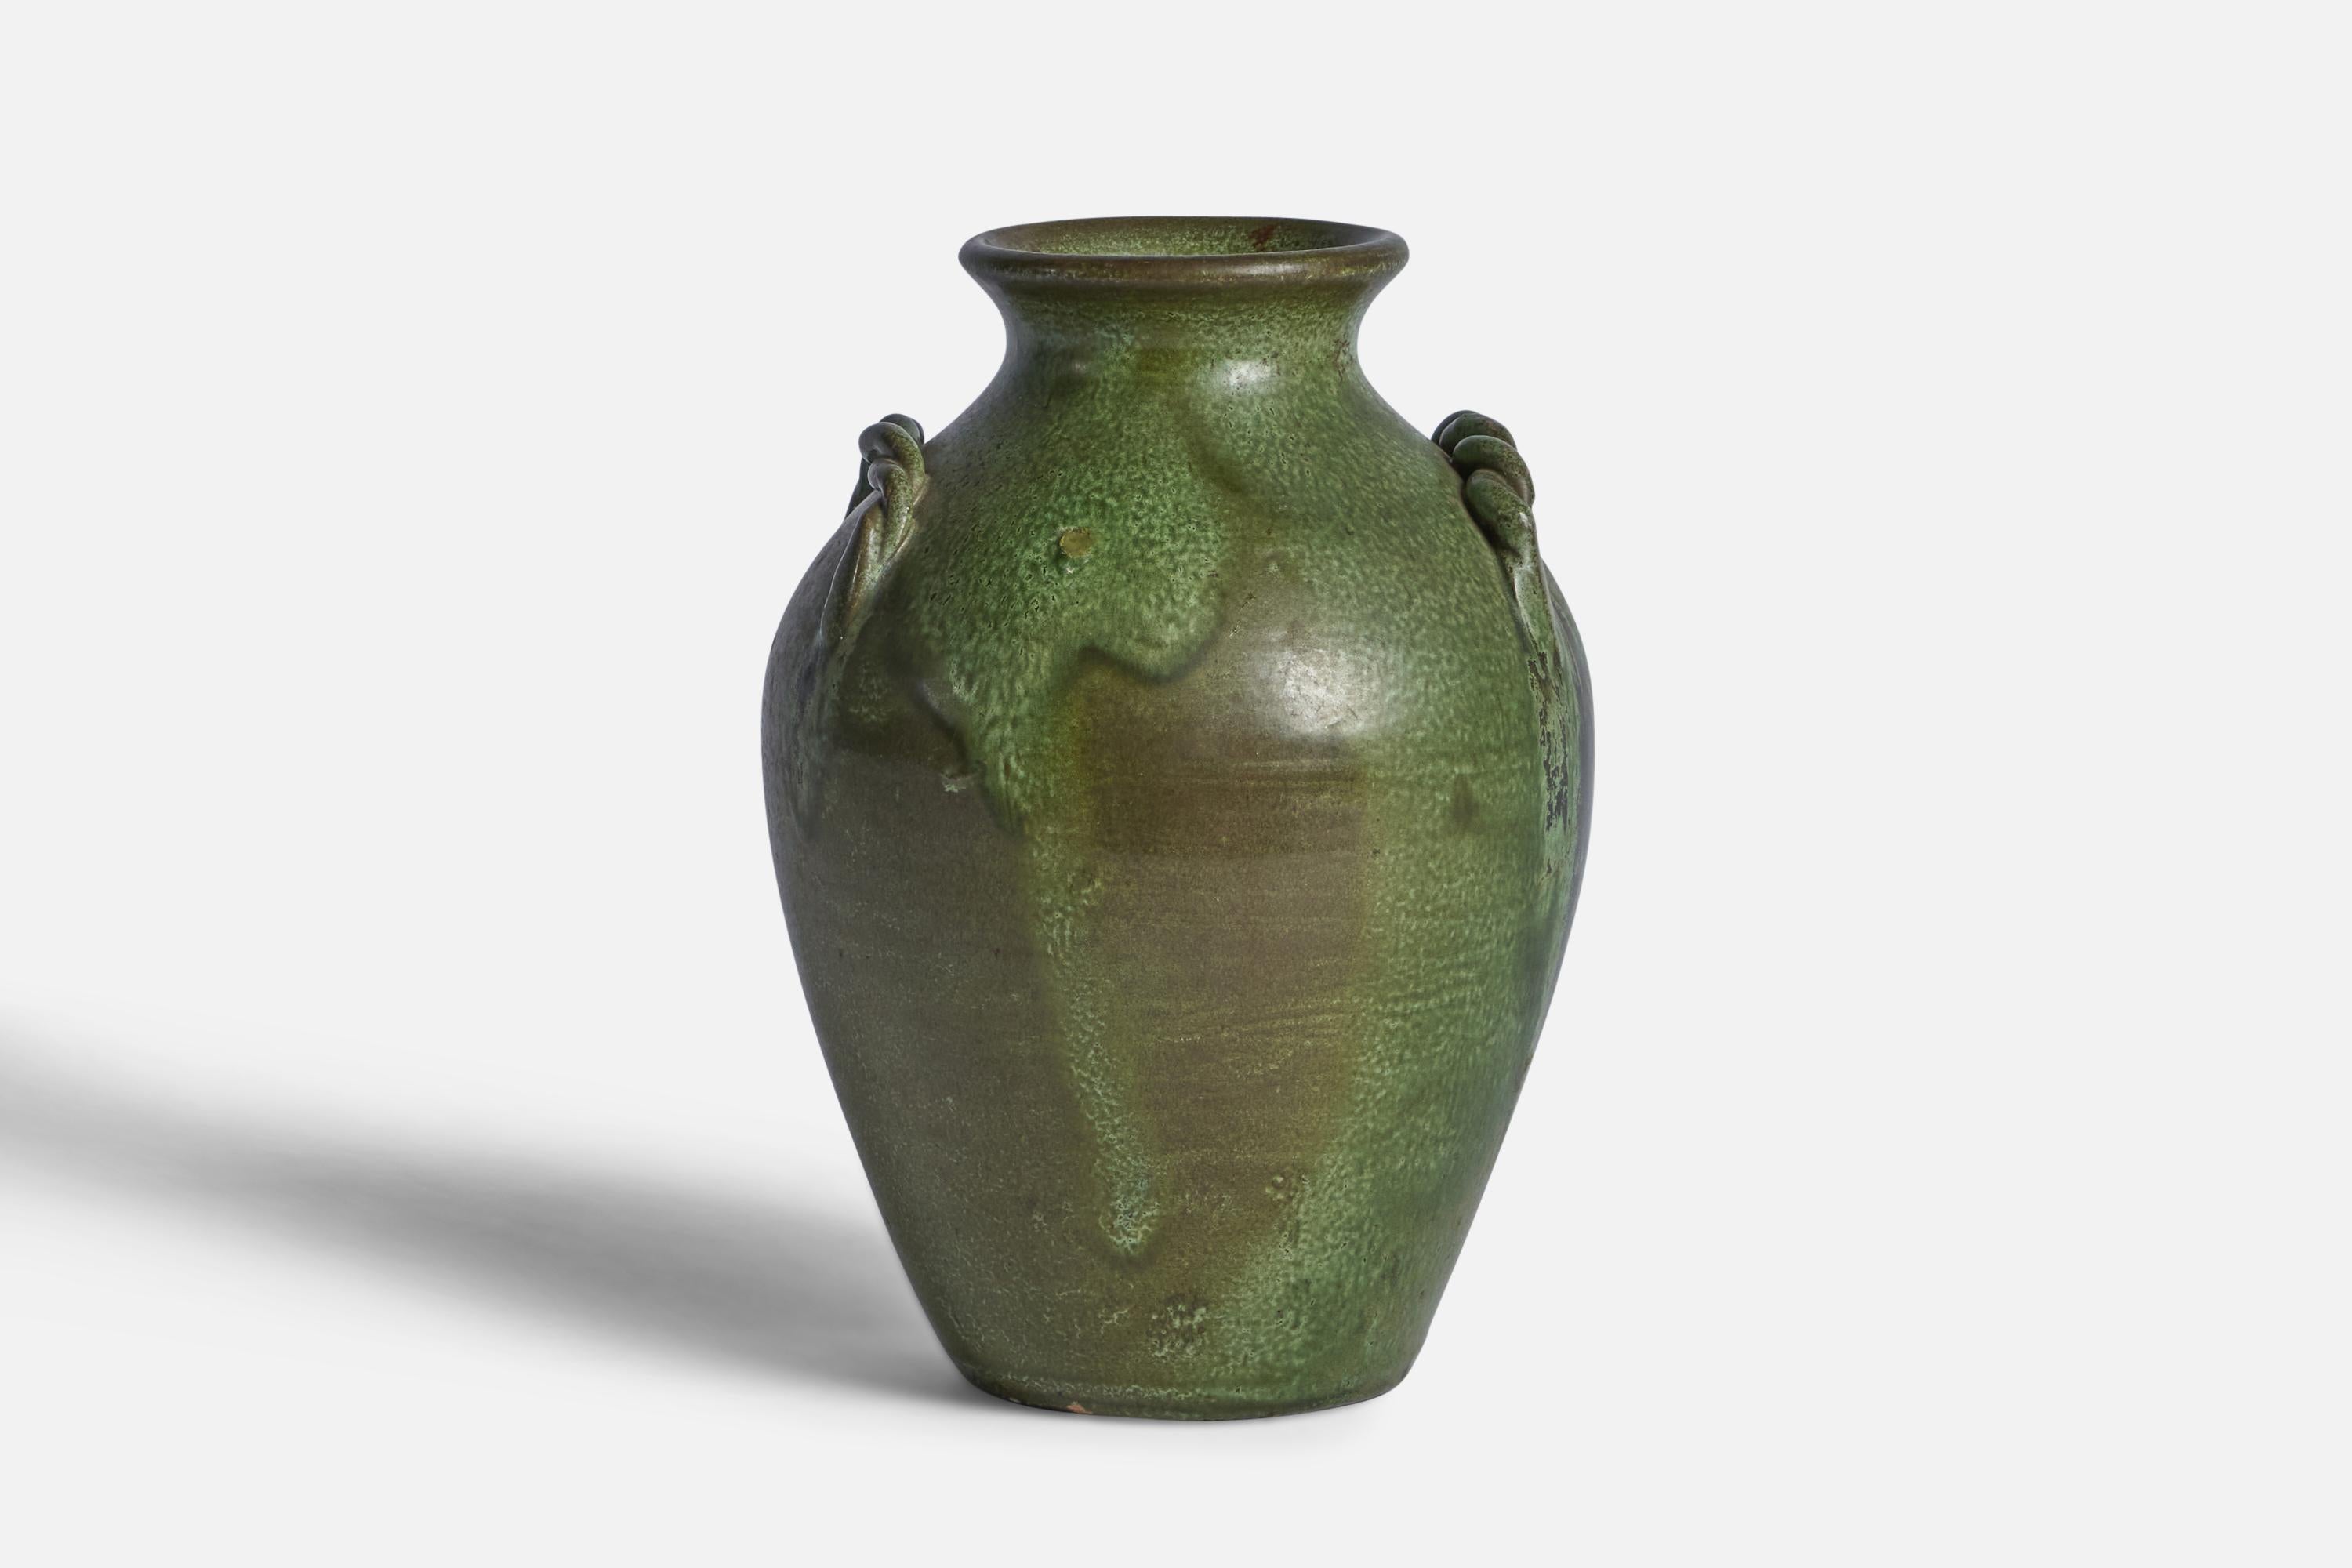 A green-glazed earthenware vase designed and produced by Cole Pottery, North Carolina, USA, 1940s.